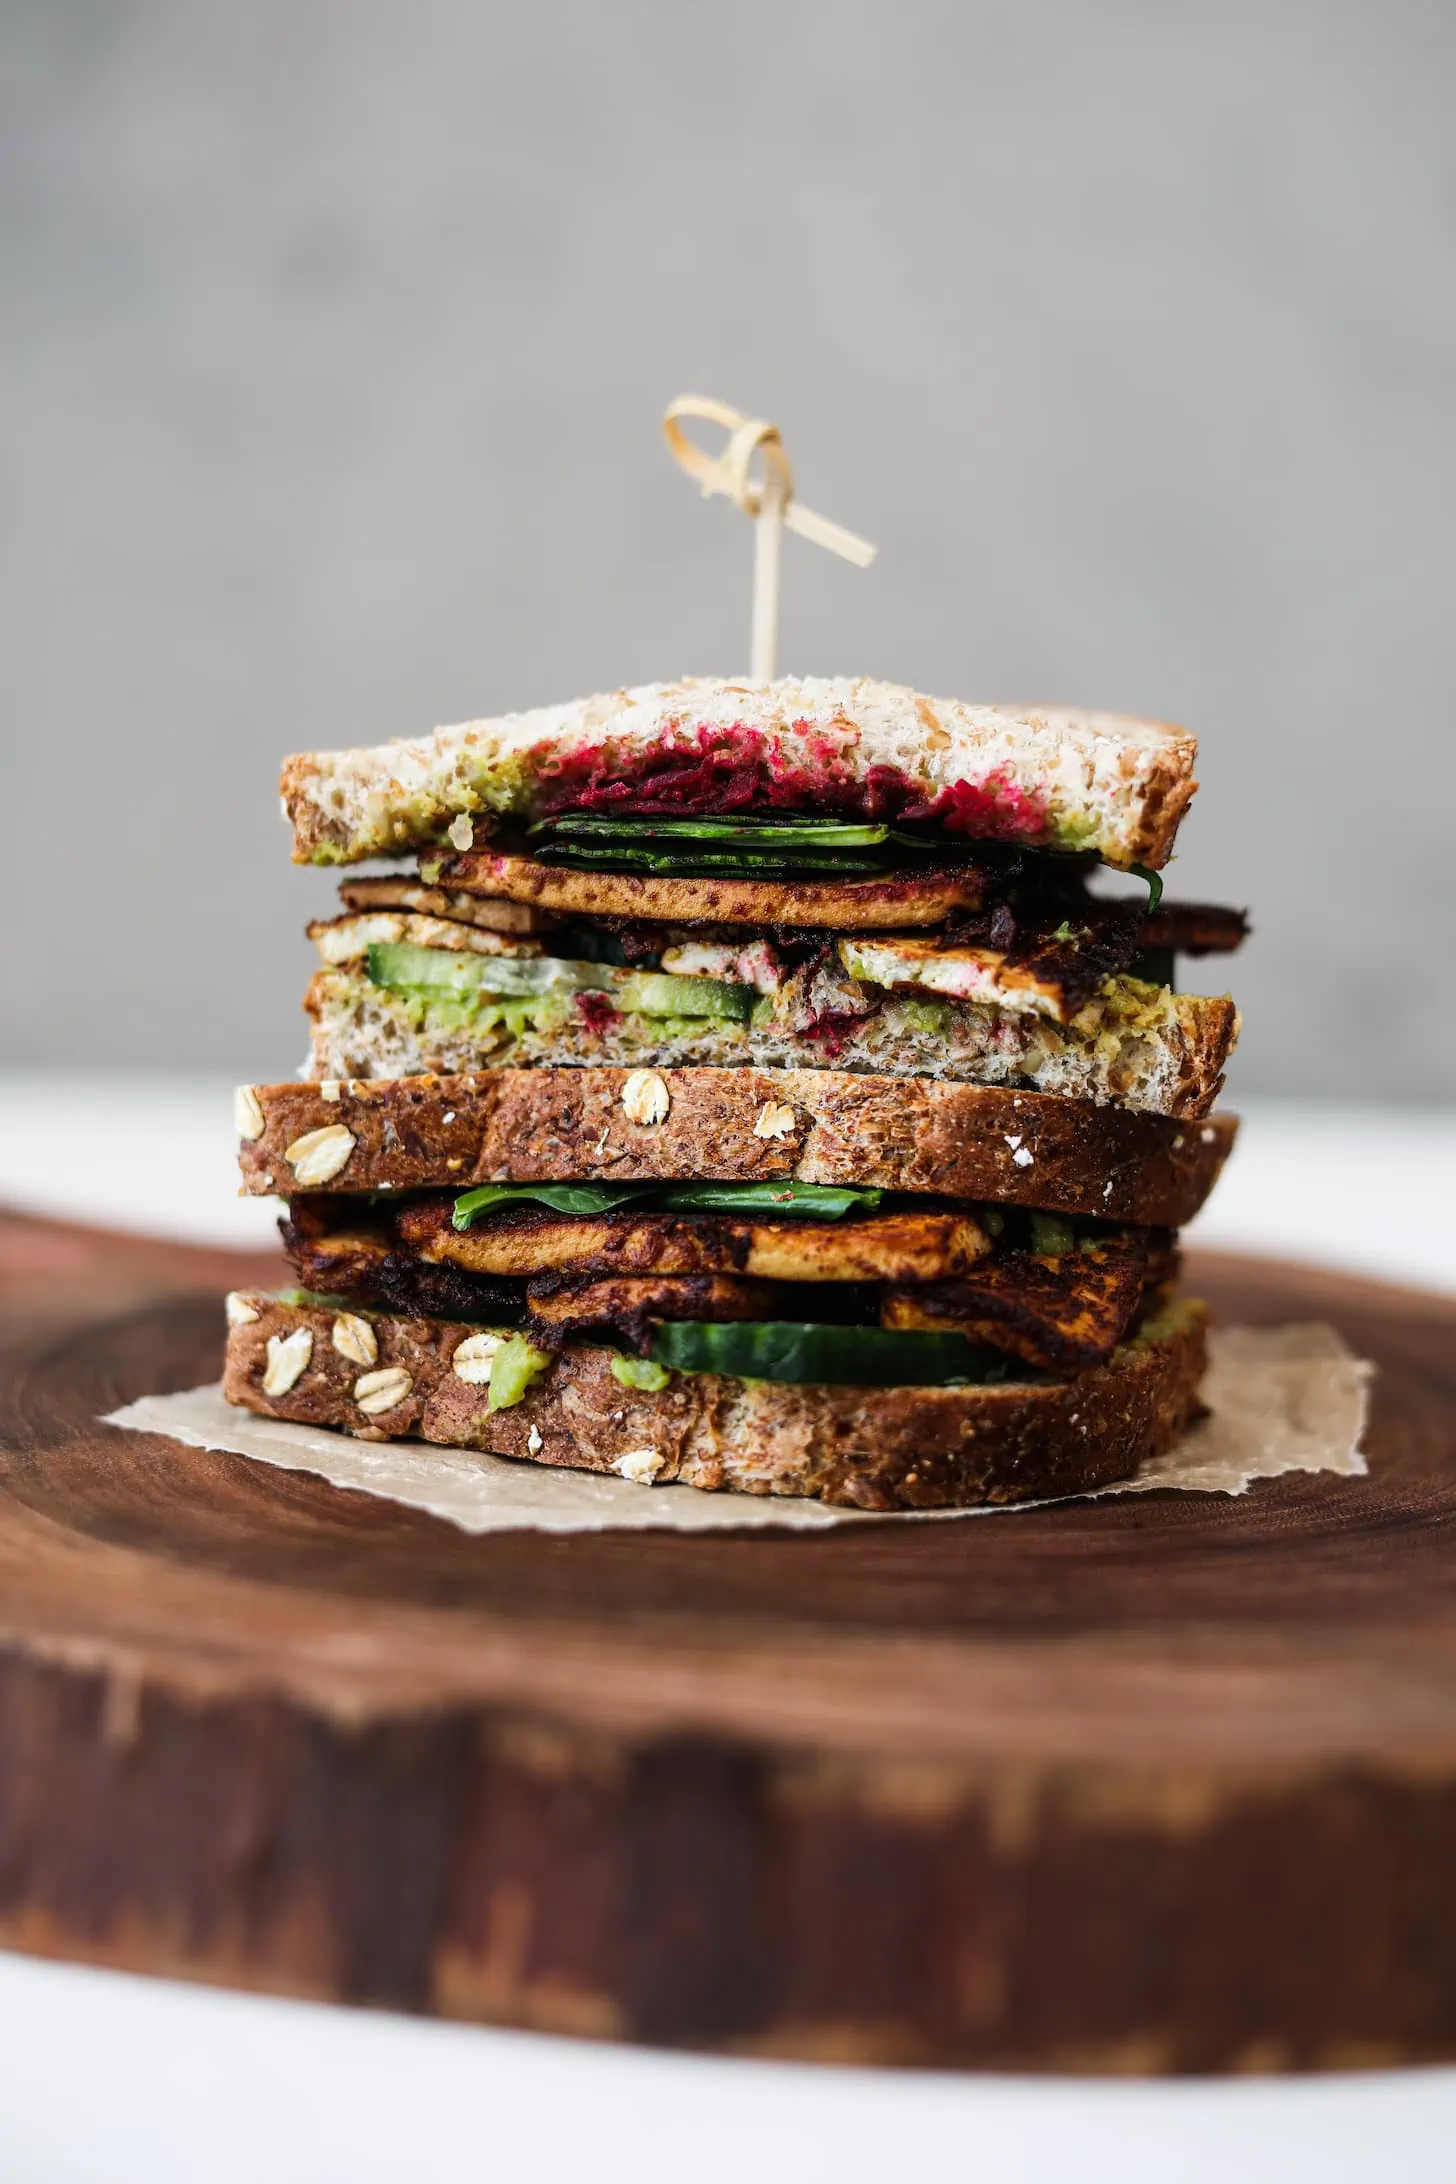 Two half tofu sandwiches stacked on top of one another, filled with salad and beetroot on a wooden board.